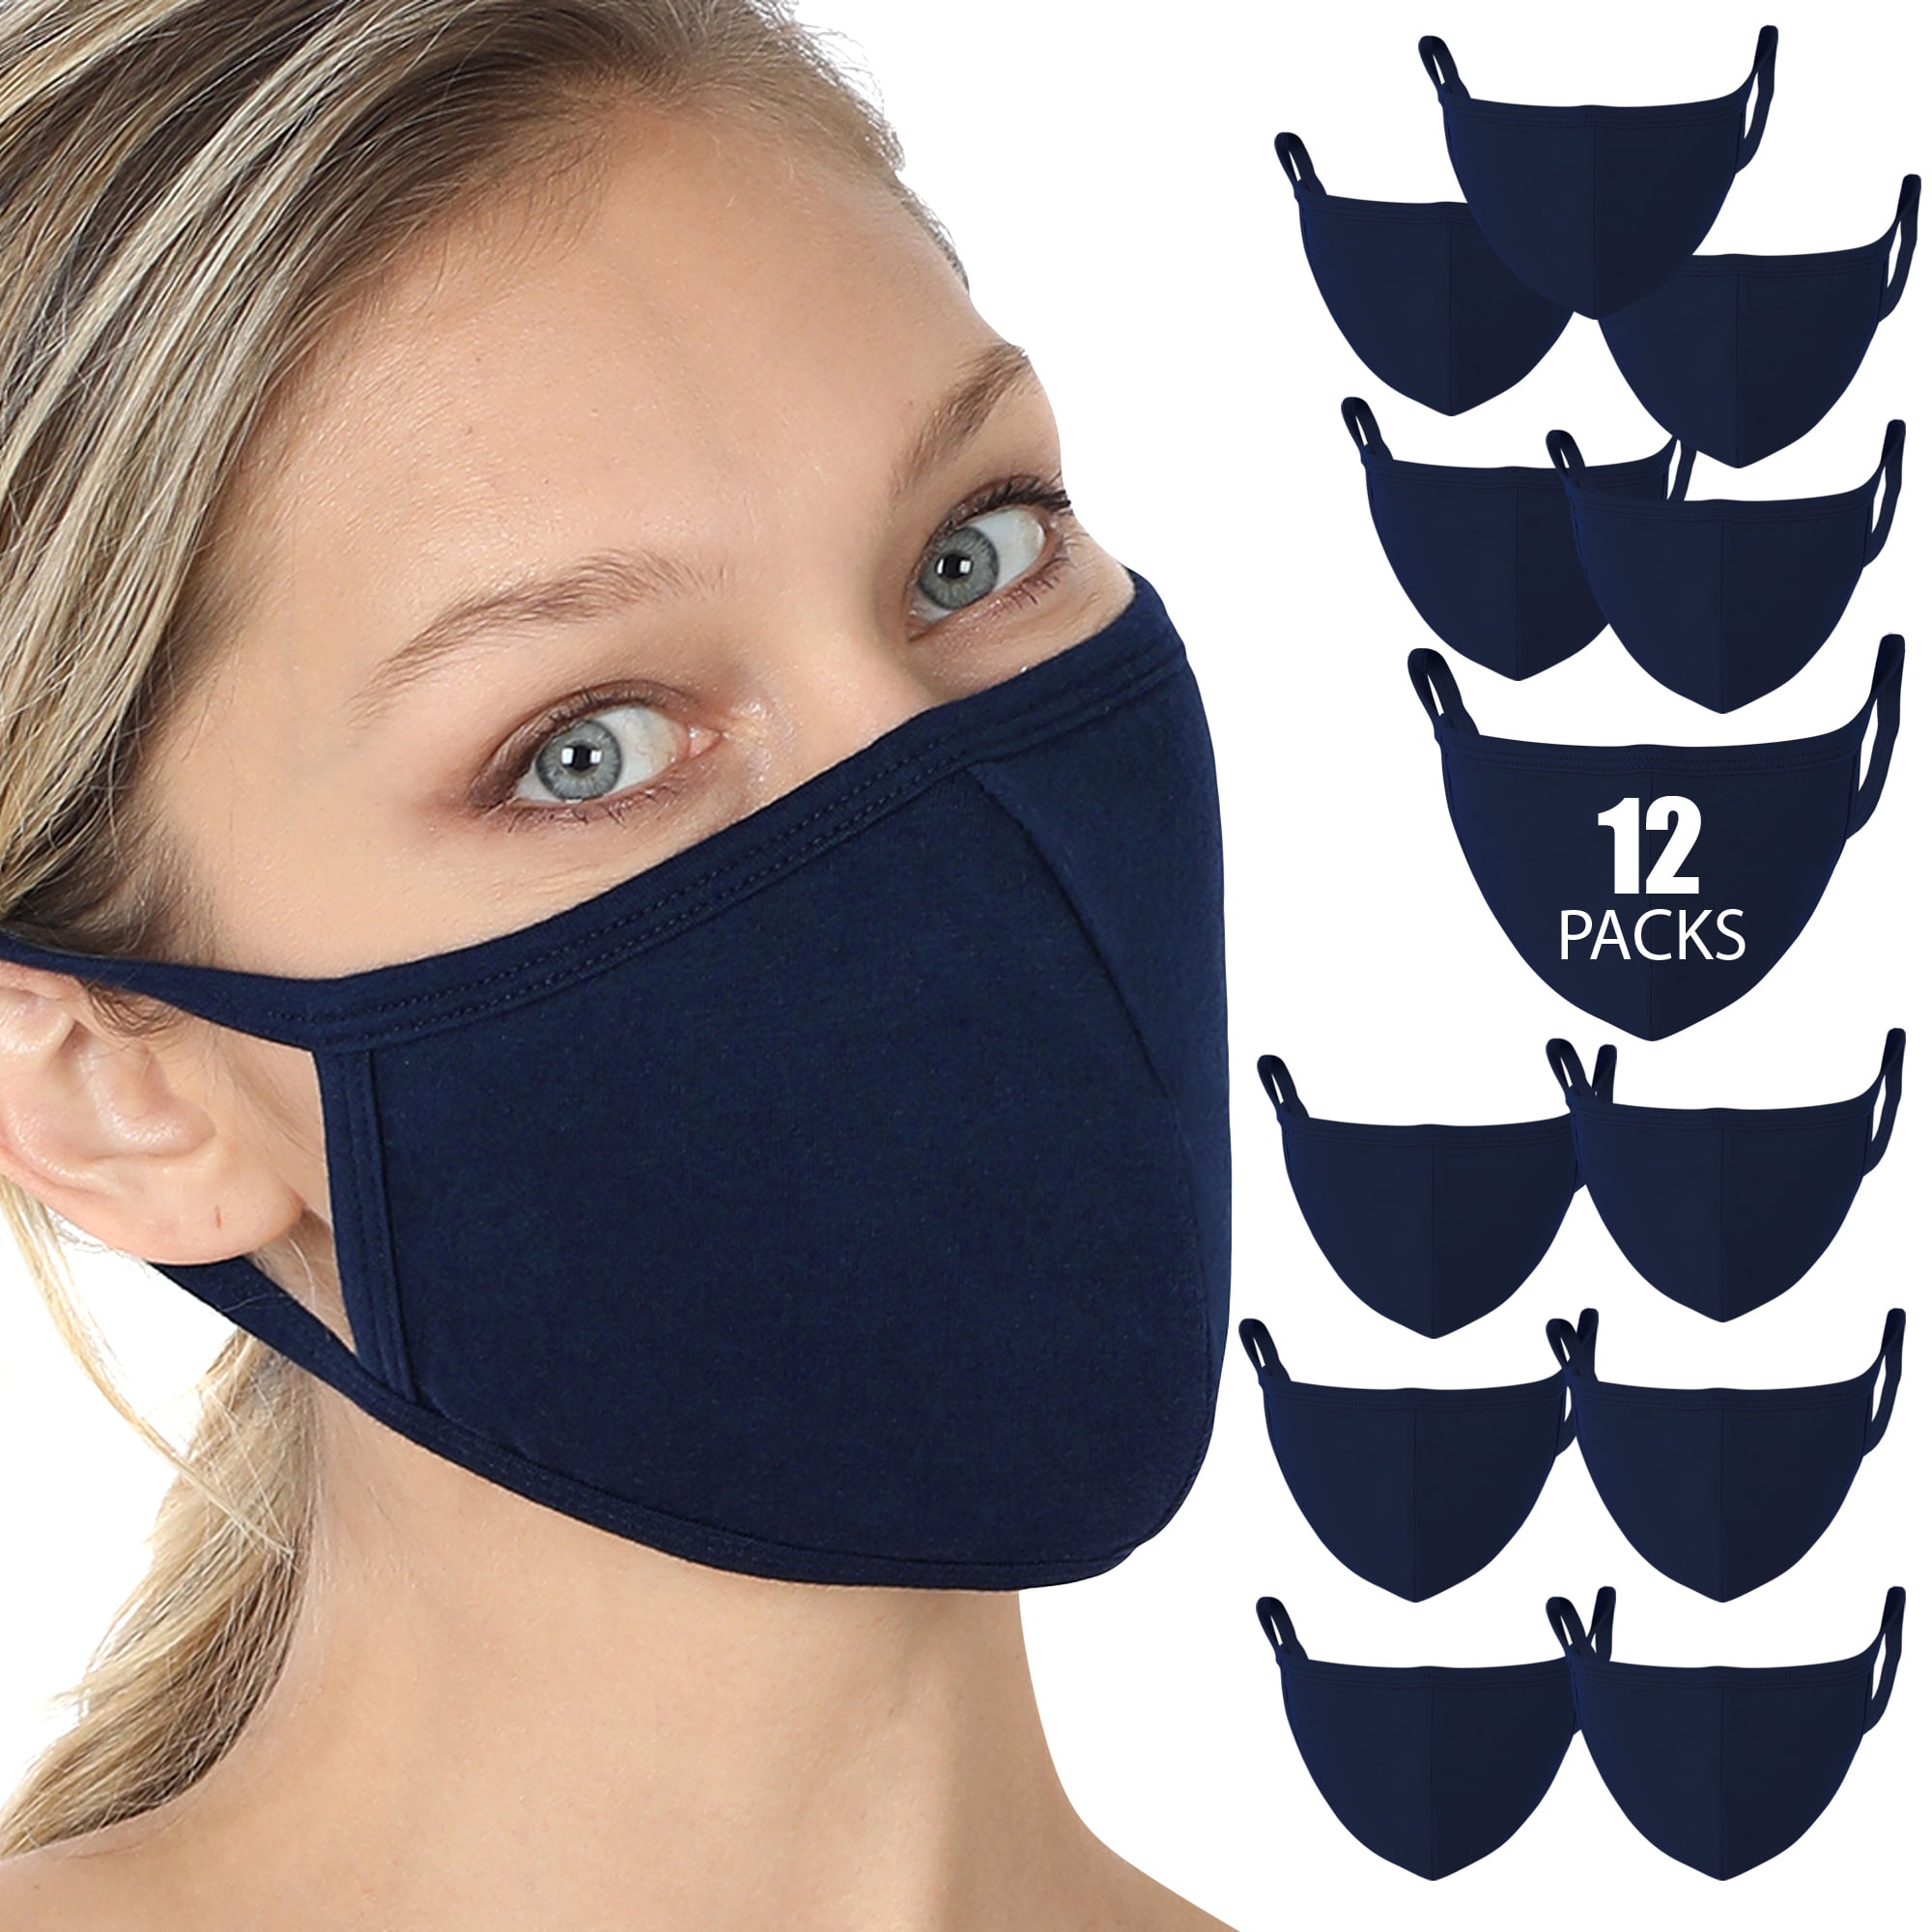 Unisex Fashion Face Mask Stretch Lightweight Cotton Covering Face and Mouth Reusable Washable Protective Blue 